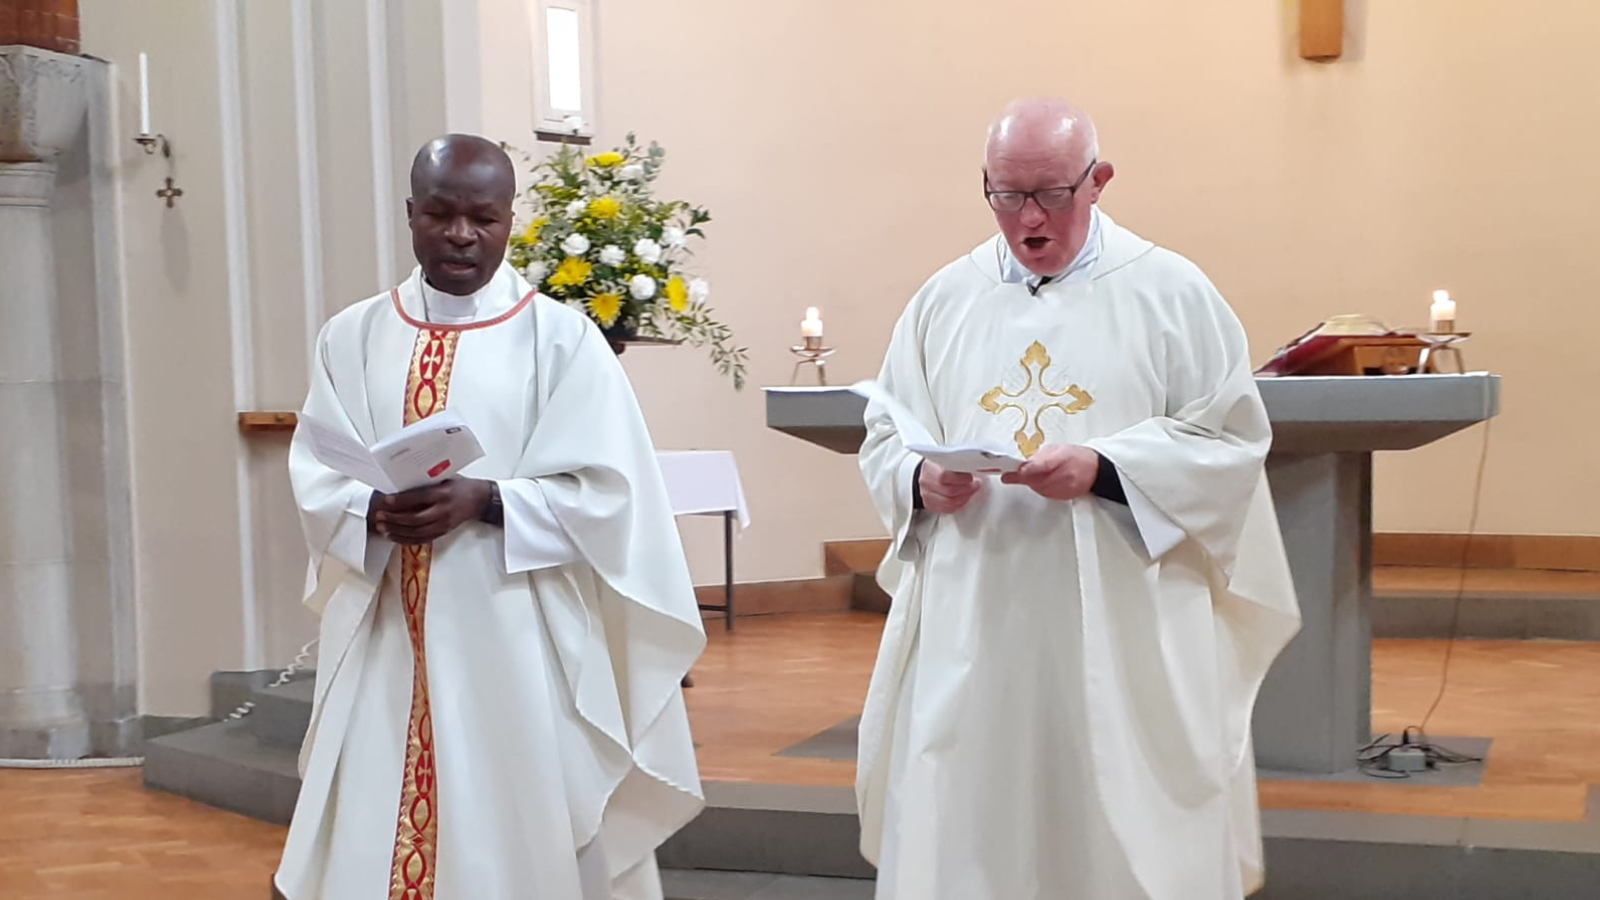 All together in Middlesbrough: a special Mission Mass